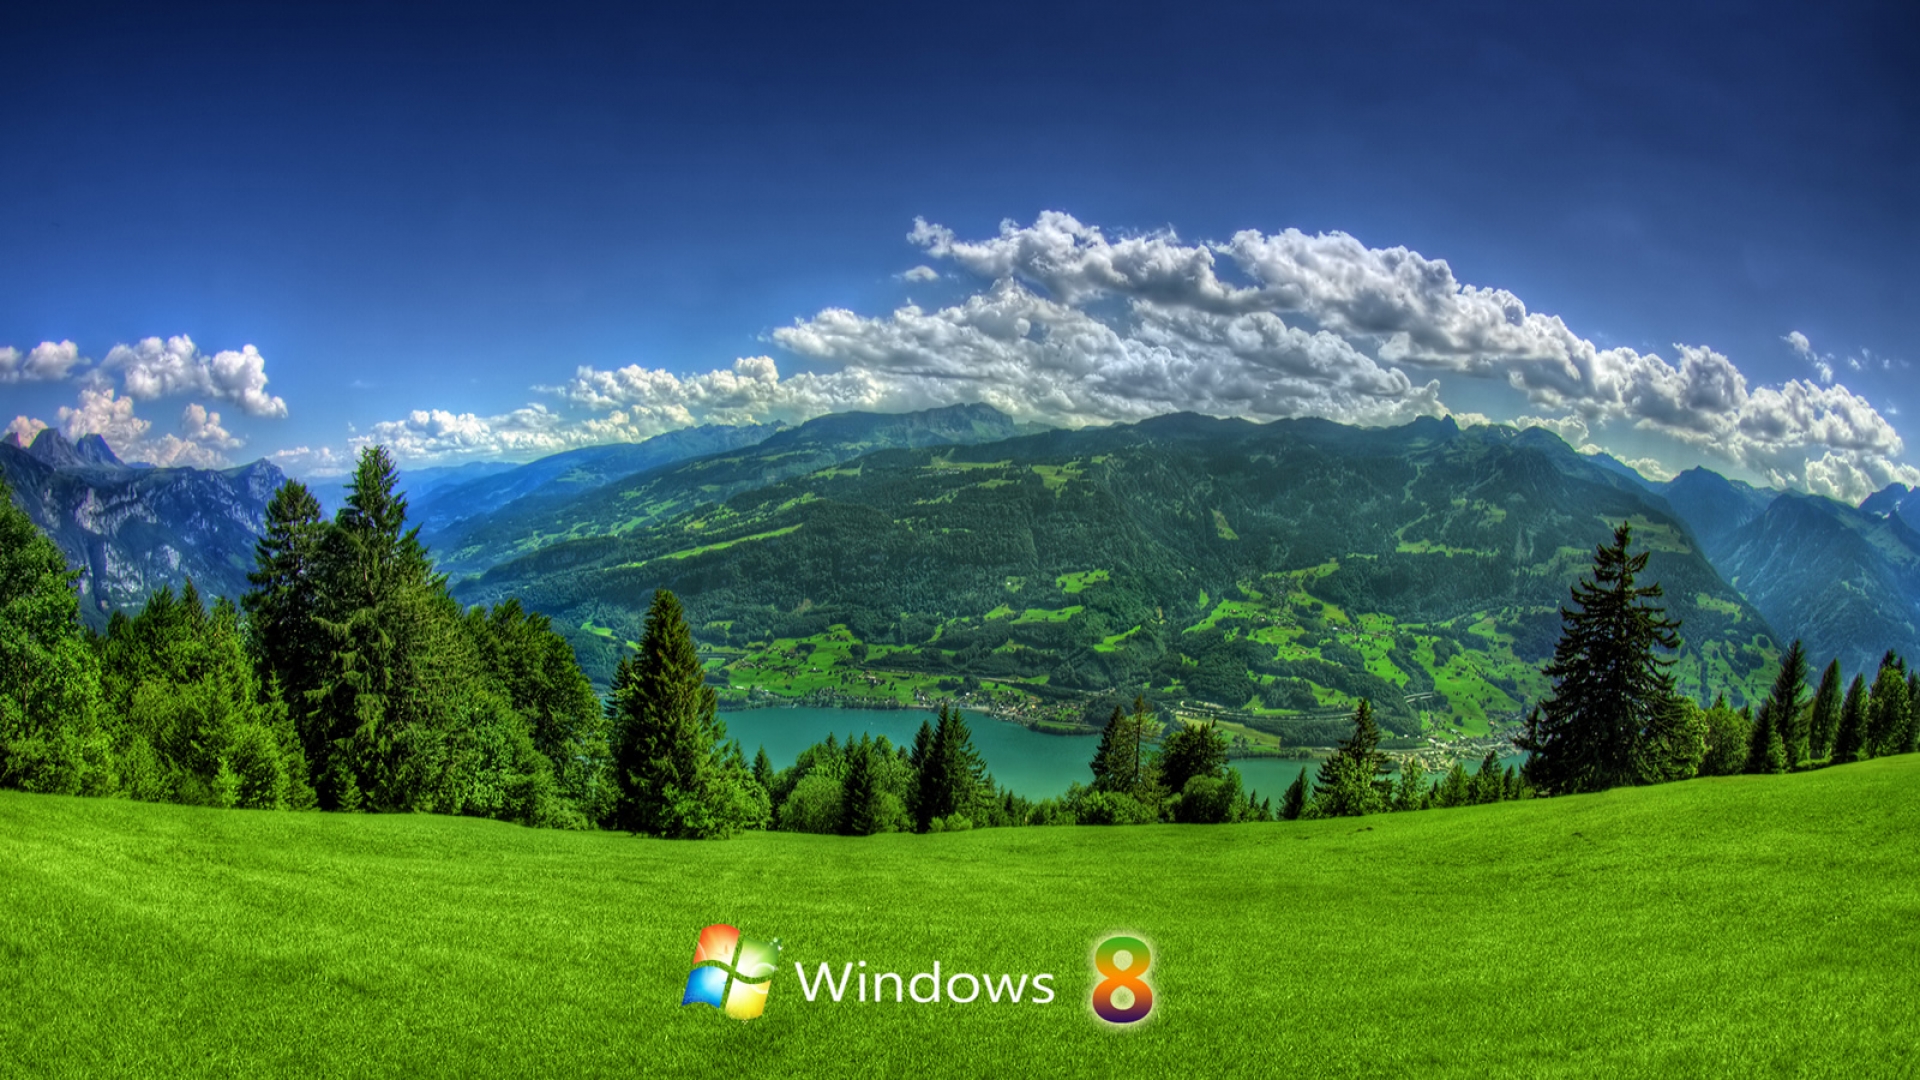 166 Windows 8 HD Wallpapers | Backgrounds - Wallpaper Abyss - Page 2